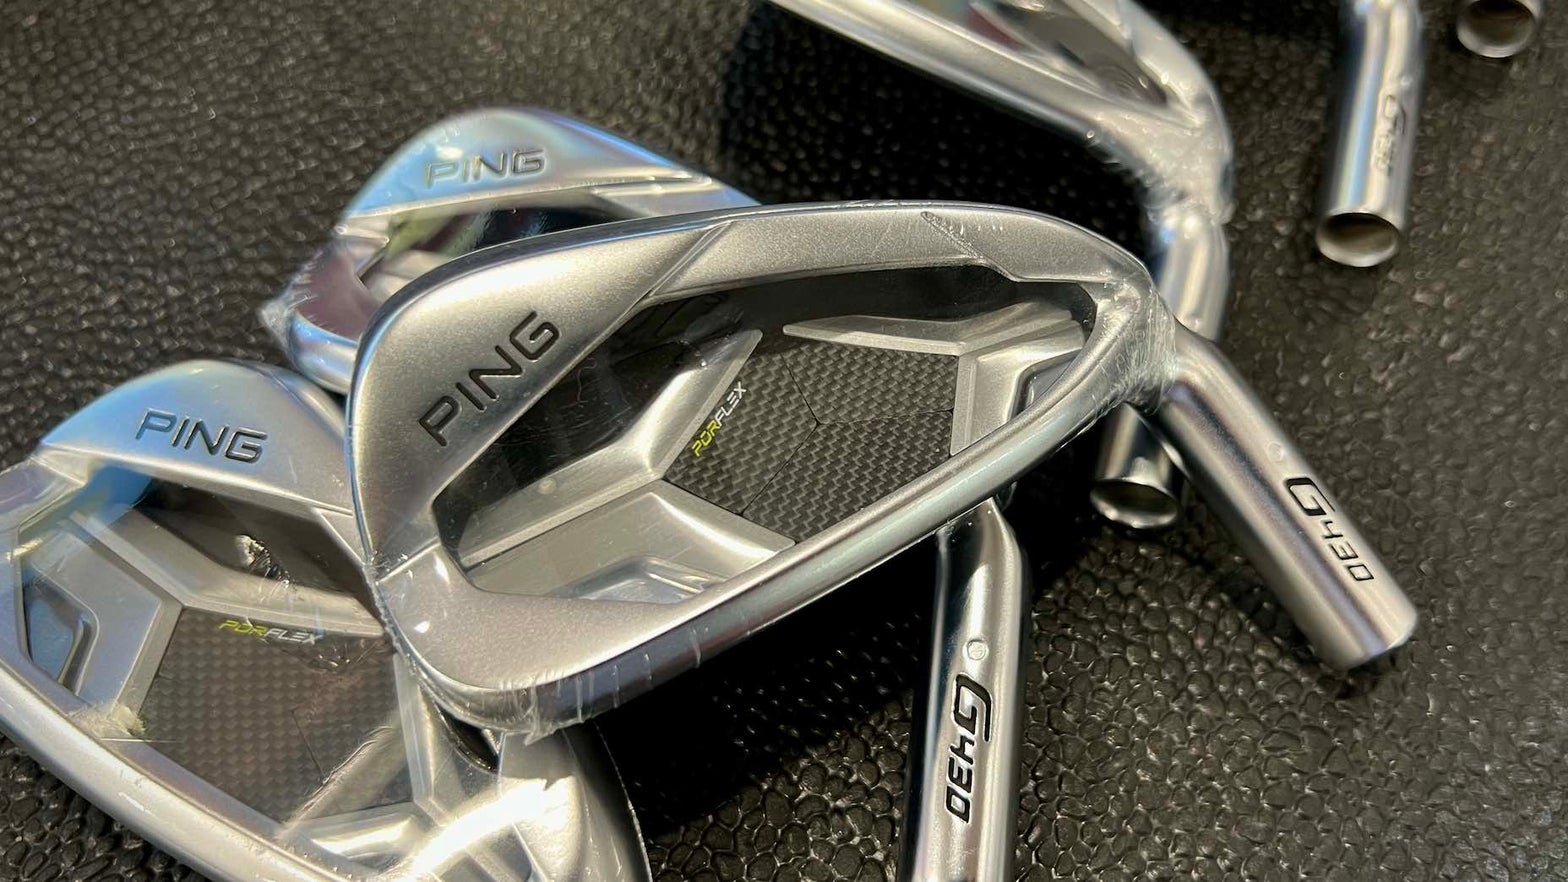 Ping G430 gameimprovement irons spotted on PGA Tour First Look